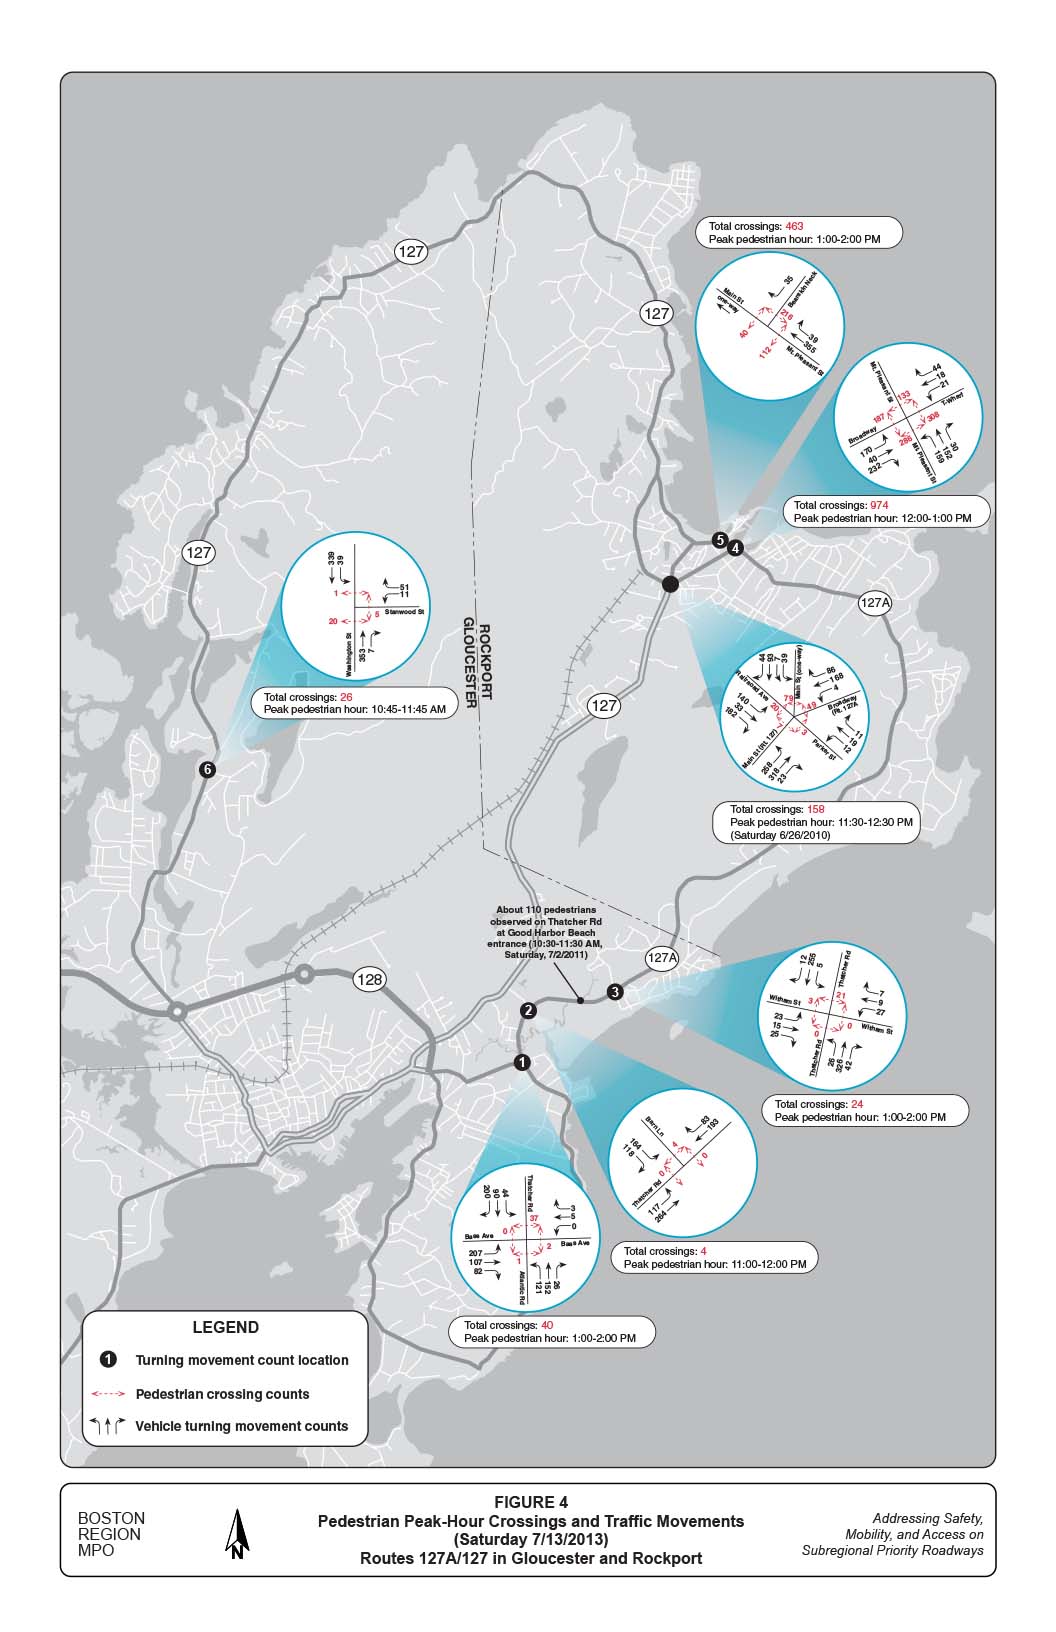 FIGURE 4. Pedestrian Peak-Hour Crossings and Traffic Movements (Saturday 7/13/2013) Routes 127A/127 in Gloucester and Rockport
This black-and-white map of the study area depicts: Turning movement count locations; pedestrian crossing counts; and vehicle turning movement counts.
